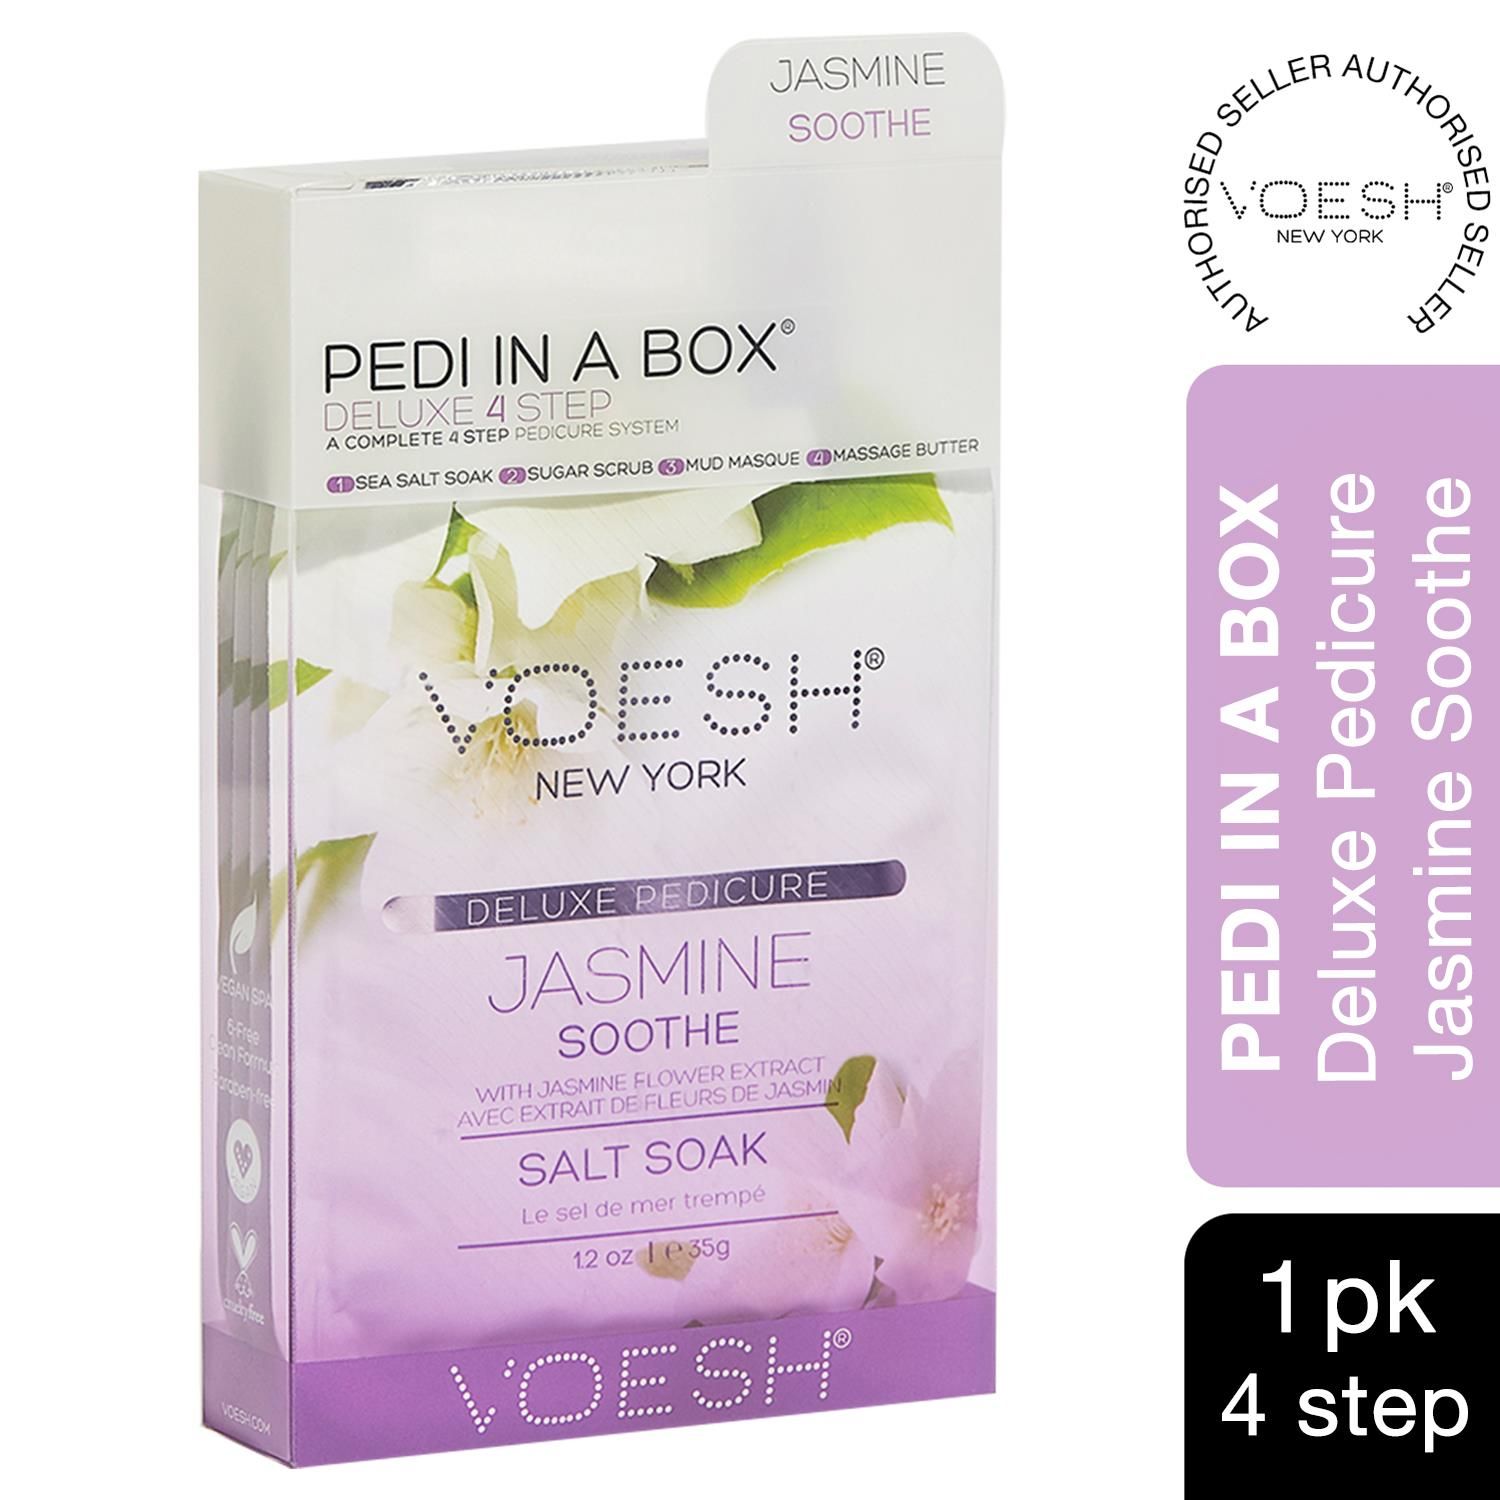 Voesh Jasmine Soothe Deluxe 4Step Pedicure In A Box with Jasmine Petal Extract.  The Cleanest And Most Hygienic Spa Pedicure Solution. Enriched With Key Ingredients To Give Your Feet The Nutrition It Needs. Each Product Is Individually Packed With The Right Amount For A Single Pedicure.

The Perfect Pedi For:
DIY At-Home Pedicure
Date Night
Bachelorette Parties
Girls’ Night In

The kit contains:
Sea Salt Soak: This soak helps relieve tension, stiffness, minor aches and discomfort in your feet. It helps detox and deodorize the feet.
Sugar Scrub: The scrub gently exfoliates dead skin cells and helps soften your feet. Perfect for use on the soles on your feet.
Mud Masque: The masque removes deep-seated impurities in your skin leaving your feet feeling clean and revived.
Massage Cream: The massage cream hydrates and soothes skin. It softens the soles of your feet and helps prevent dryness and roughness.

4 Step Includes
Sea Salt Soak 35g: to detox & deodorize the feet.
Sugar Scrub 35g: to gently exfoliate dead skin.
Mud Masque 35g: to deep cleanse impurities.
Massage Butter 35g: to hydrate and soothe skin.